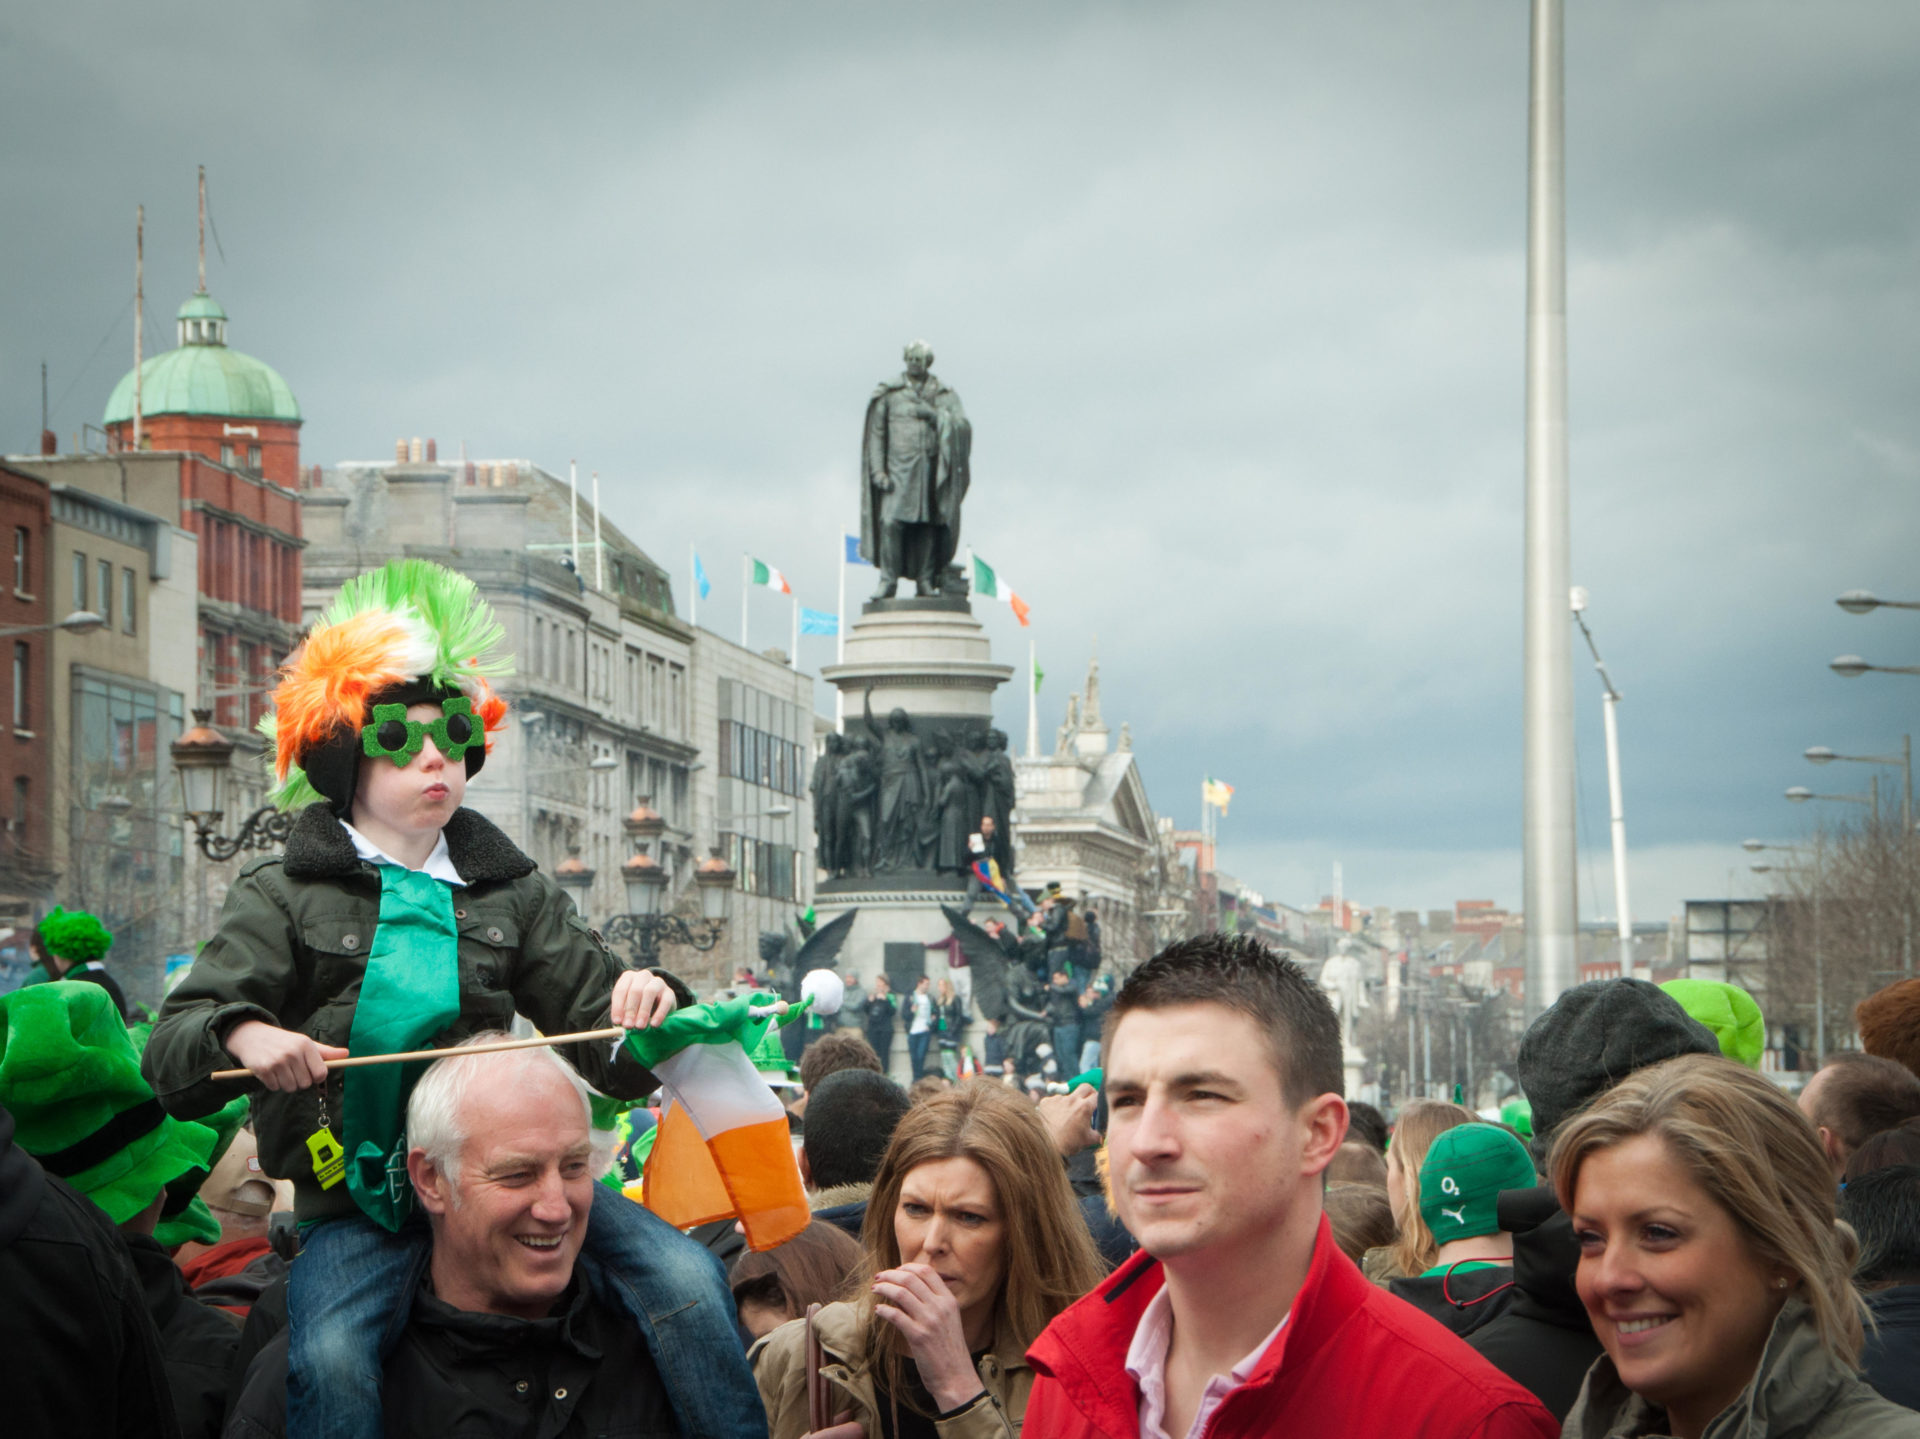 Young boy on father's shoulders on St Patrick's day in Dublin.